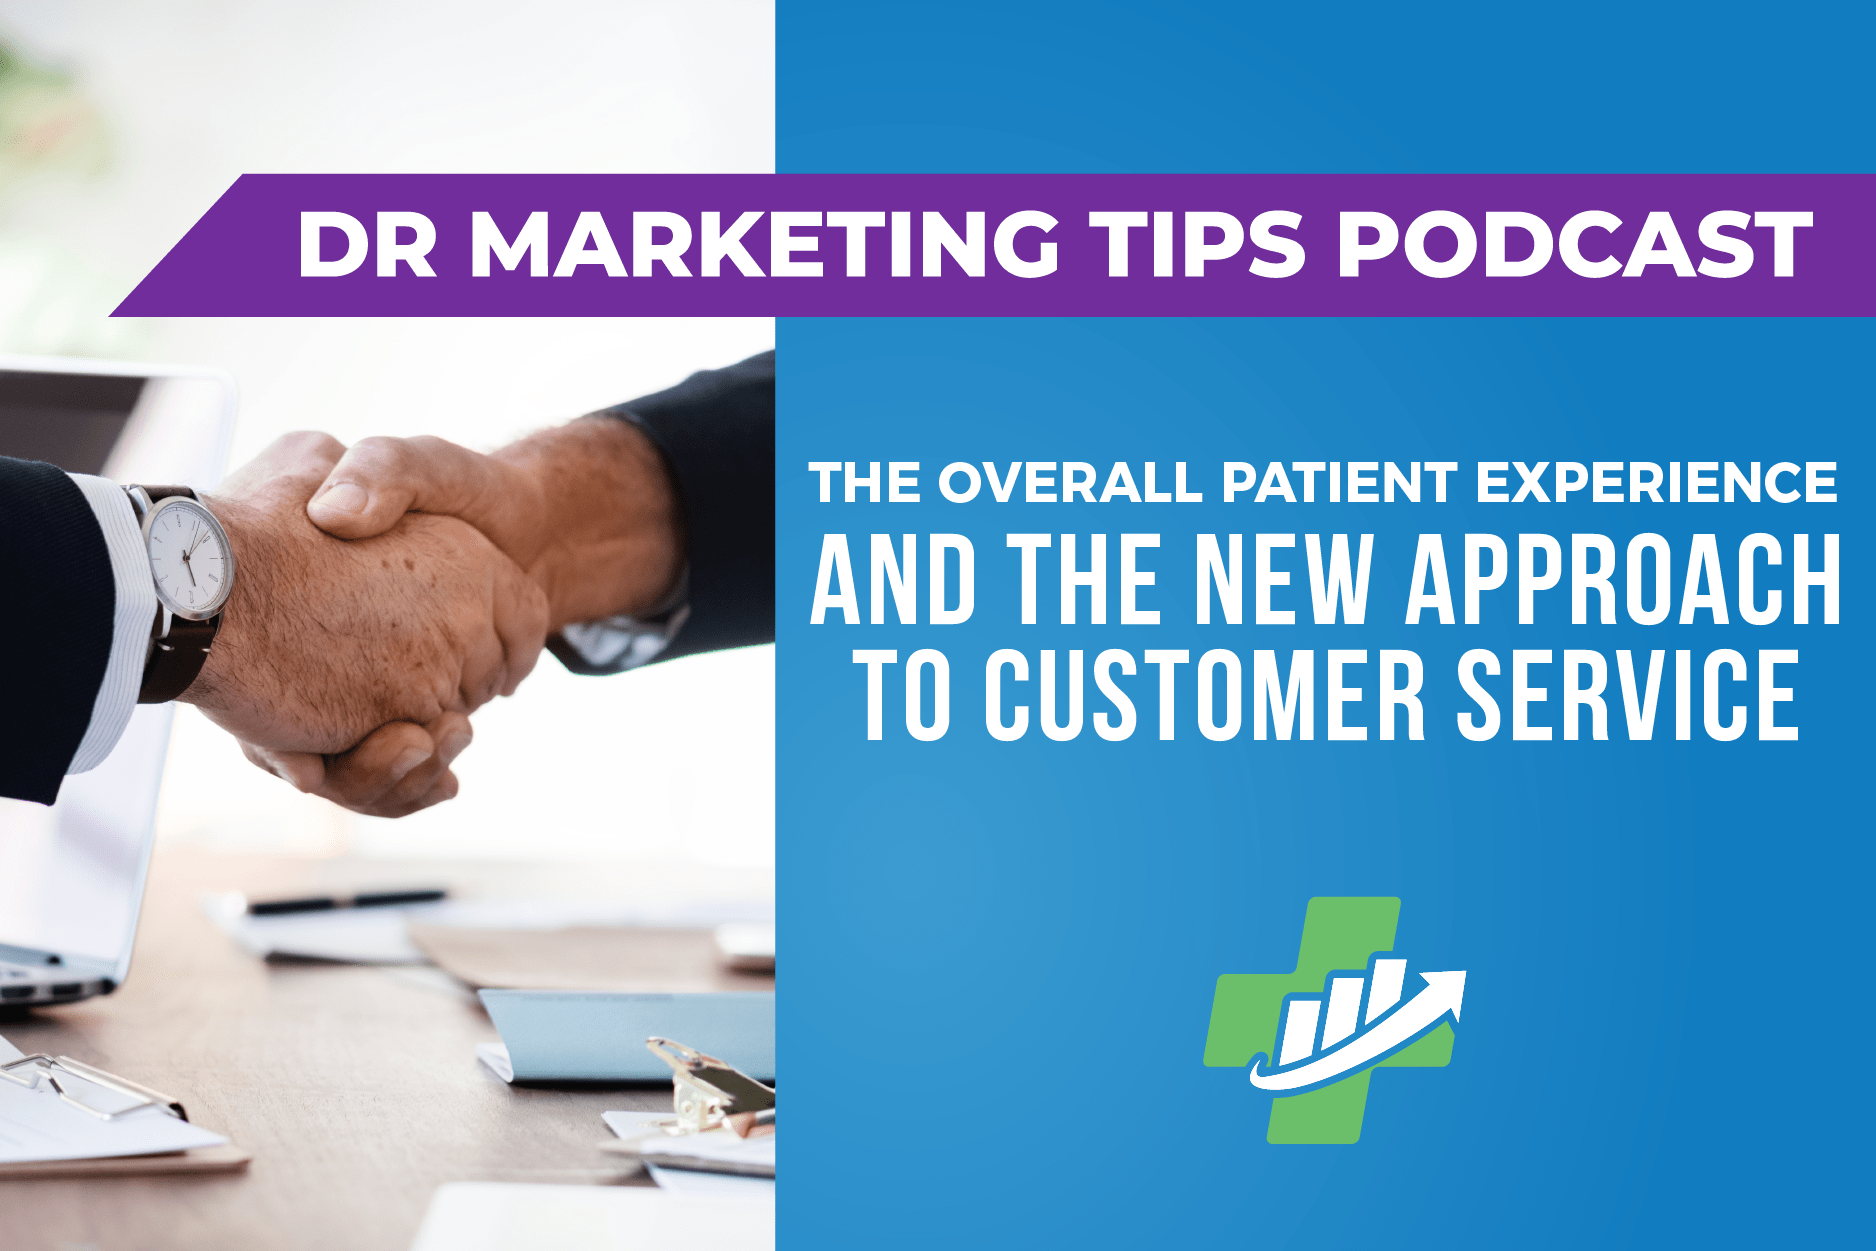 Ep. 166 - The Overall Patient Experience and the New Approach to Customer Service